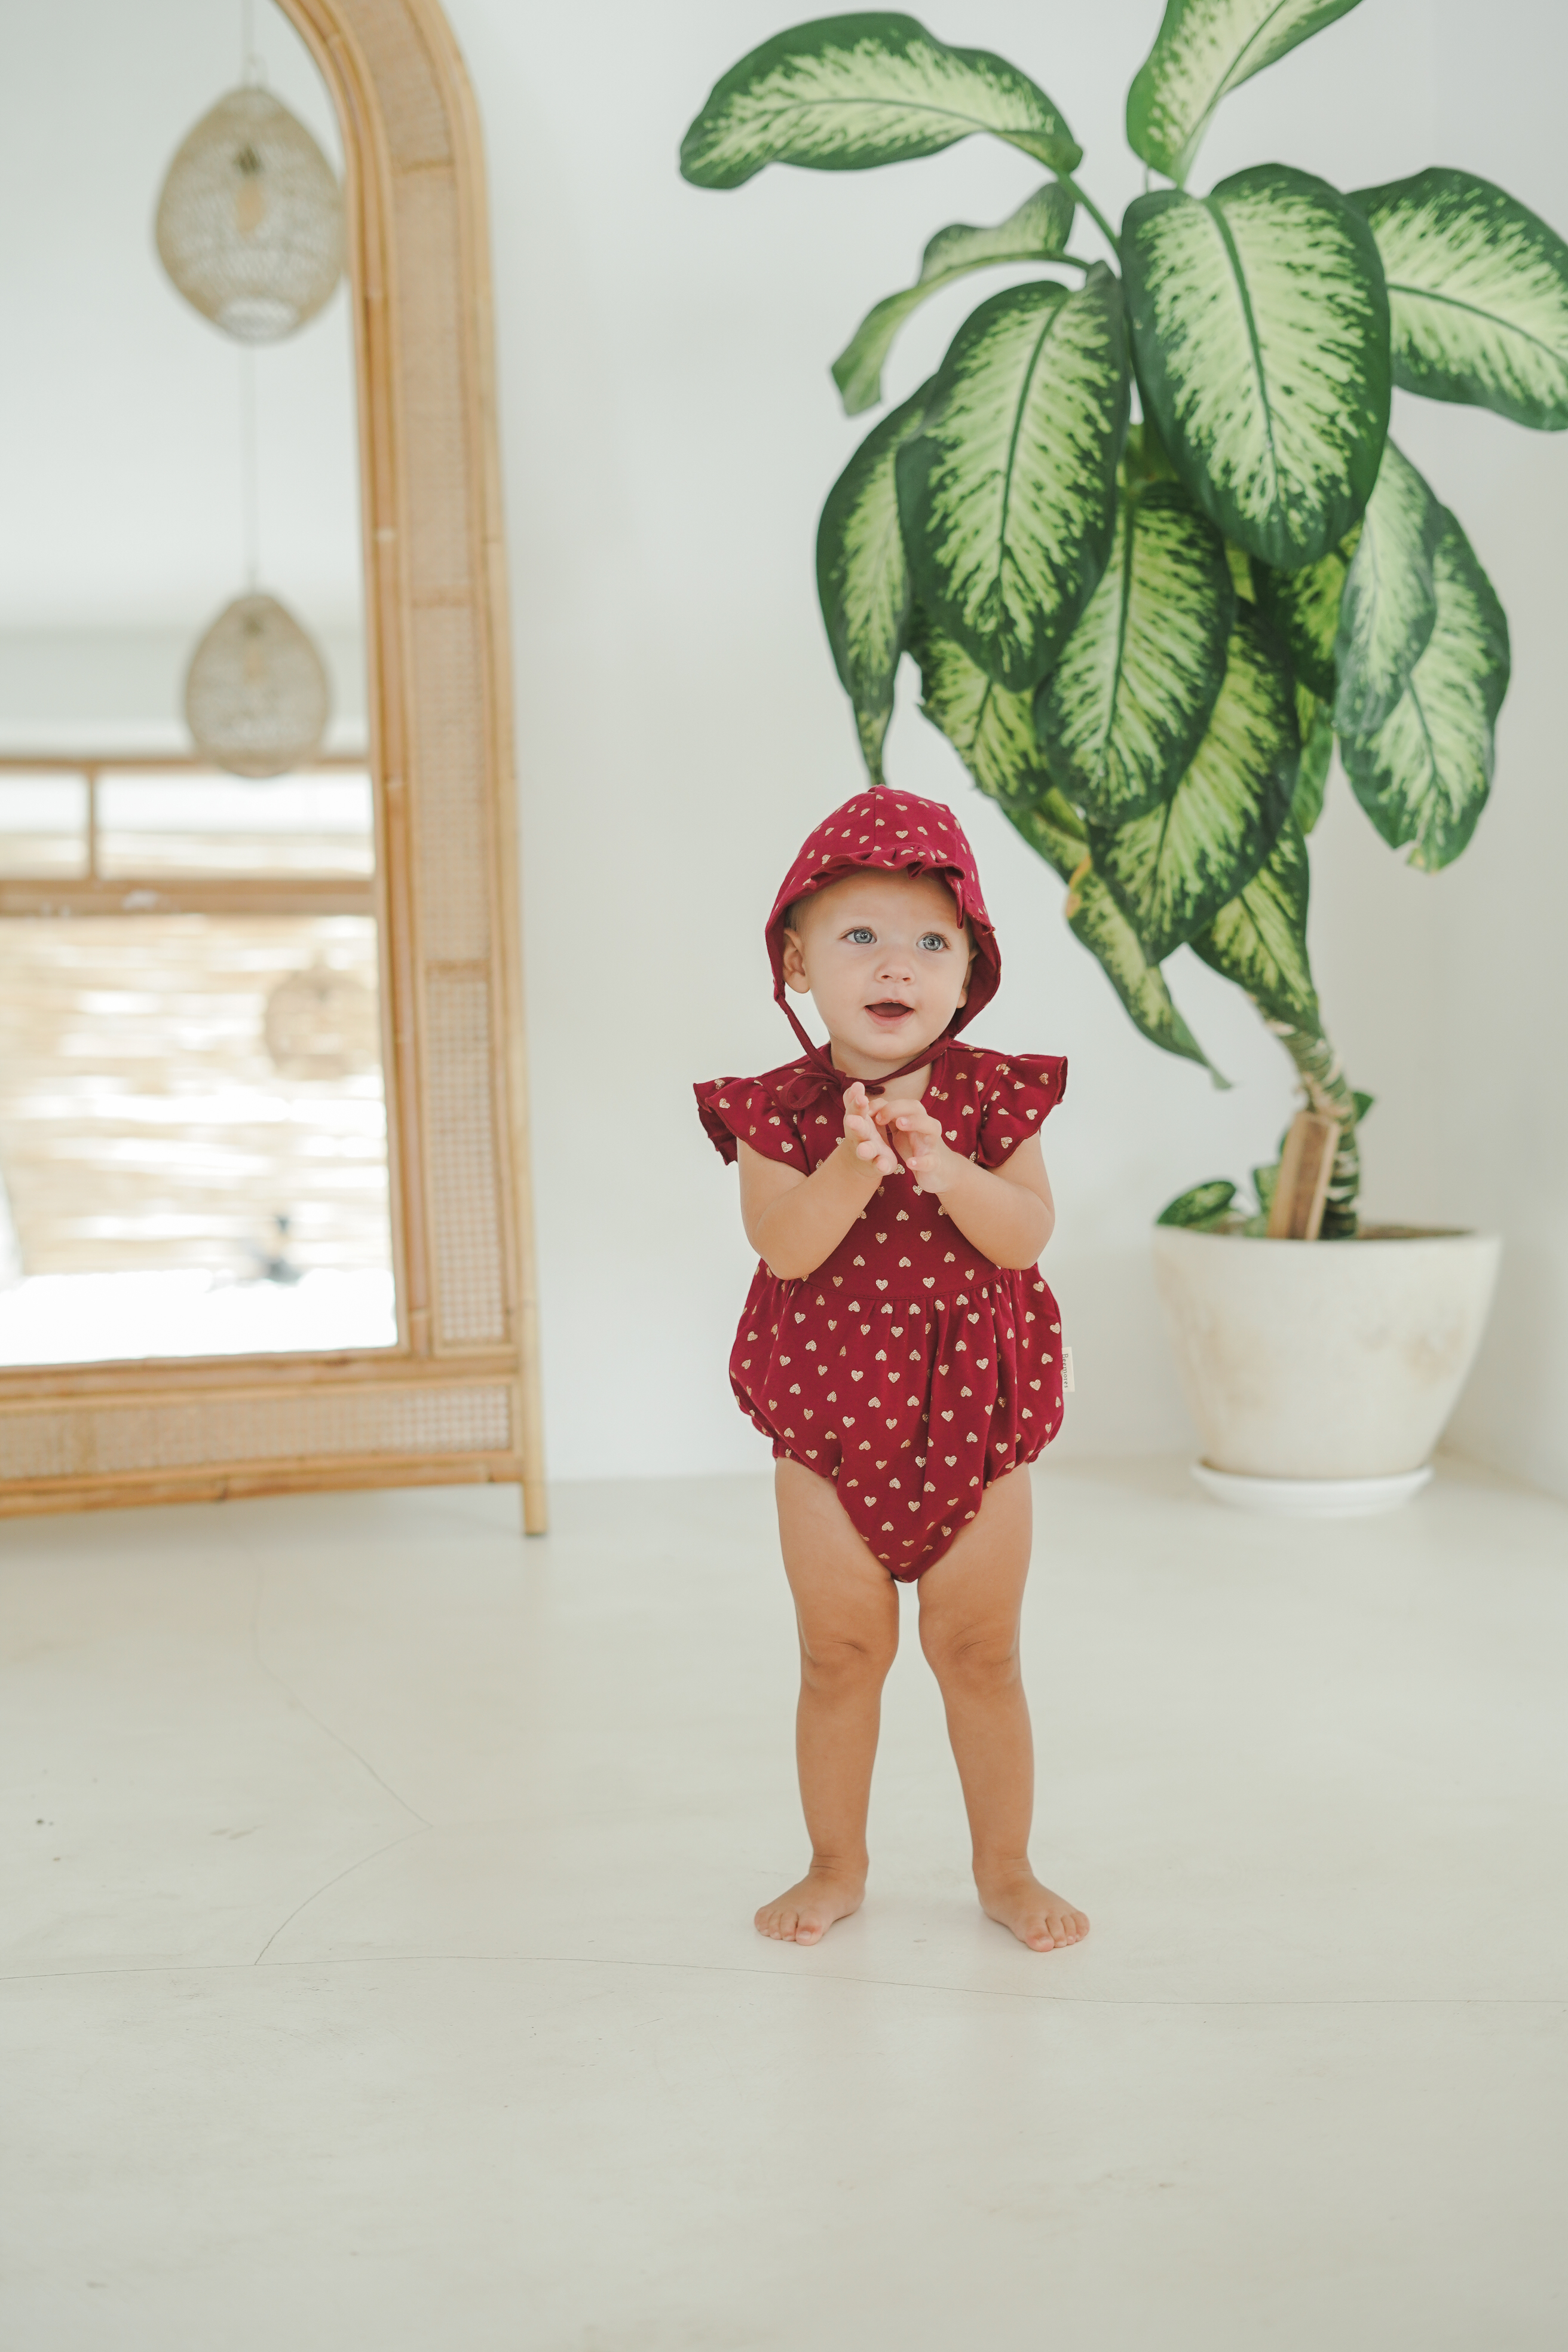 Beemores - Quality Kids Clothing Made For Daily Wear Malaysia |  - INFANT